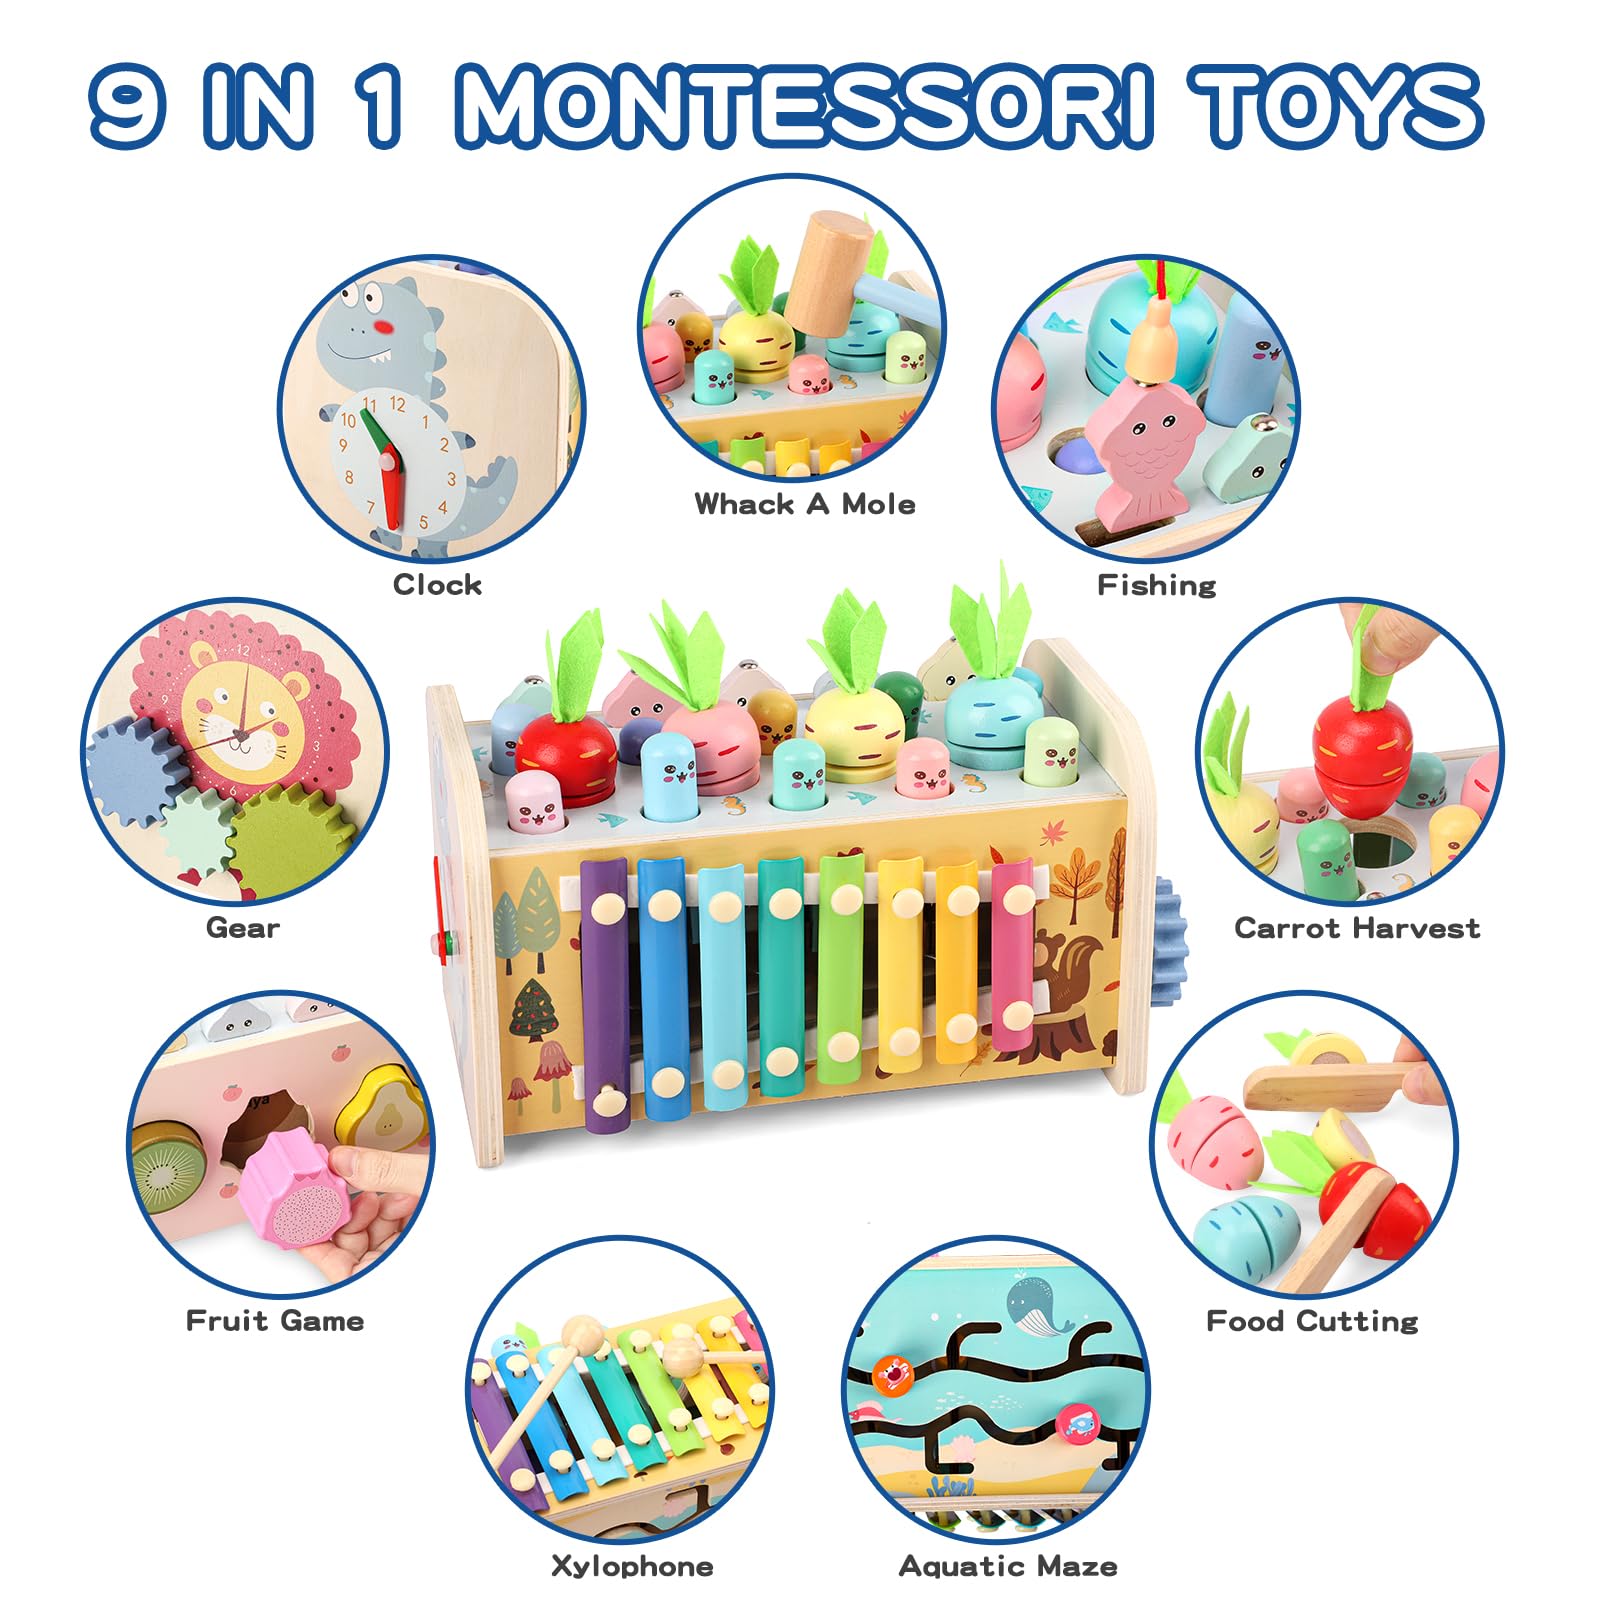 Lterfear 9 in 1 Montessori Toys for 1 Year Old Wooden Hammering Pounding Toy Whack A Mole Game for Toddlers with Xylophone Fishing Toddler Activities